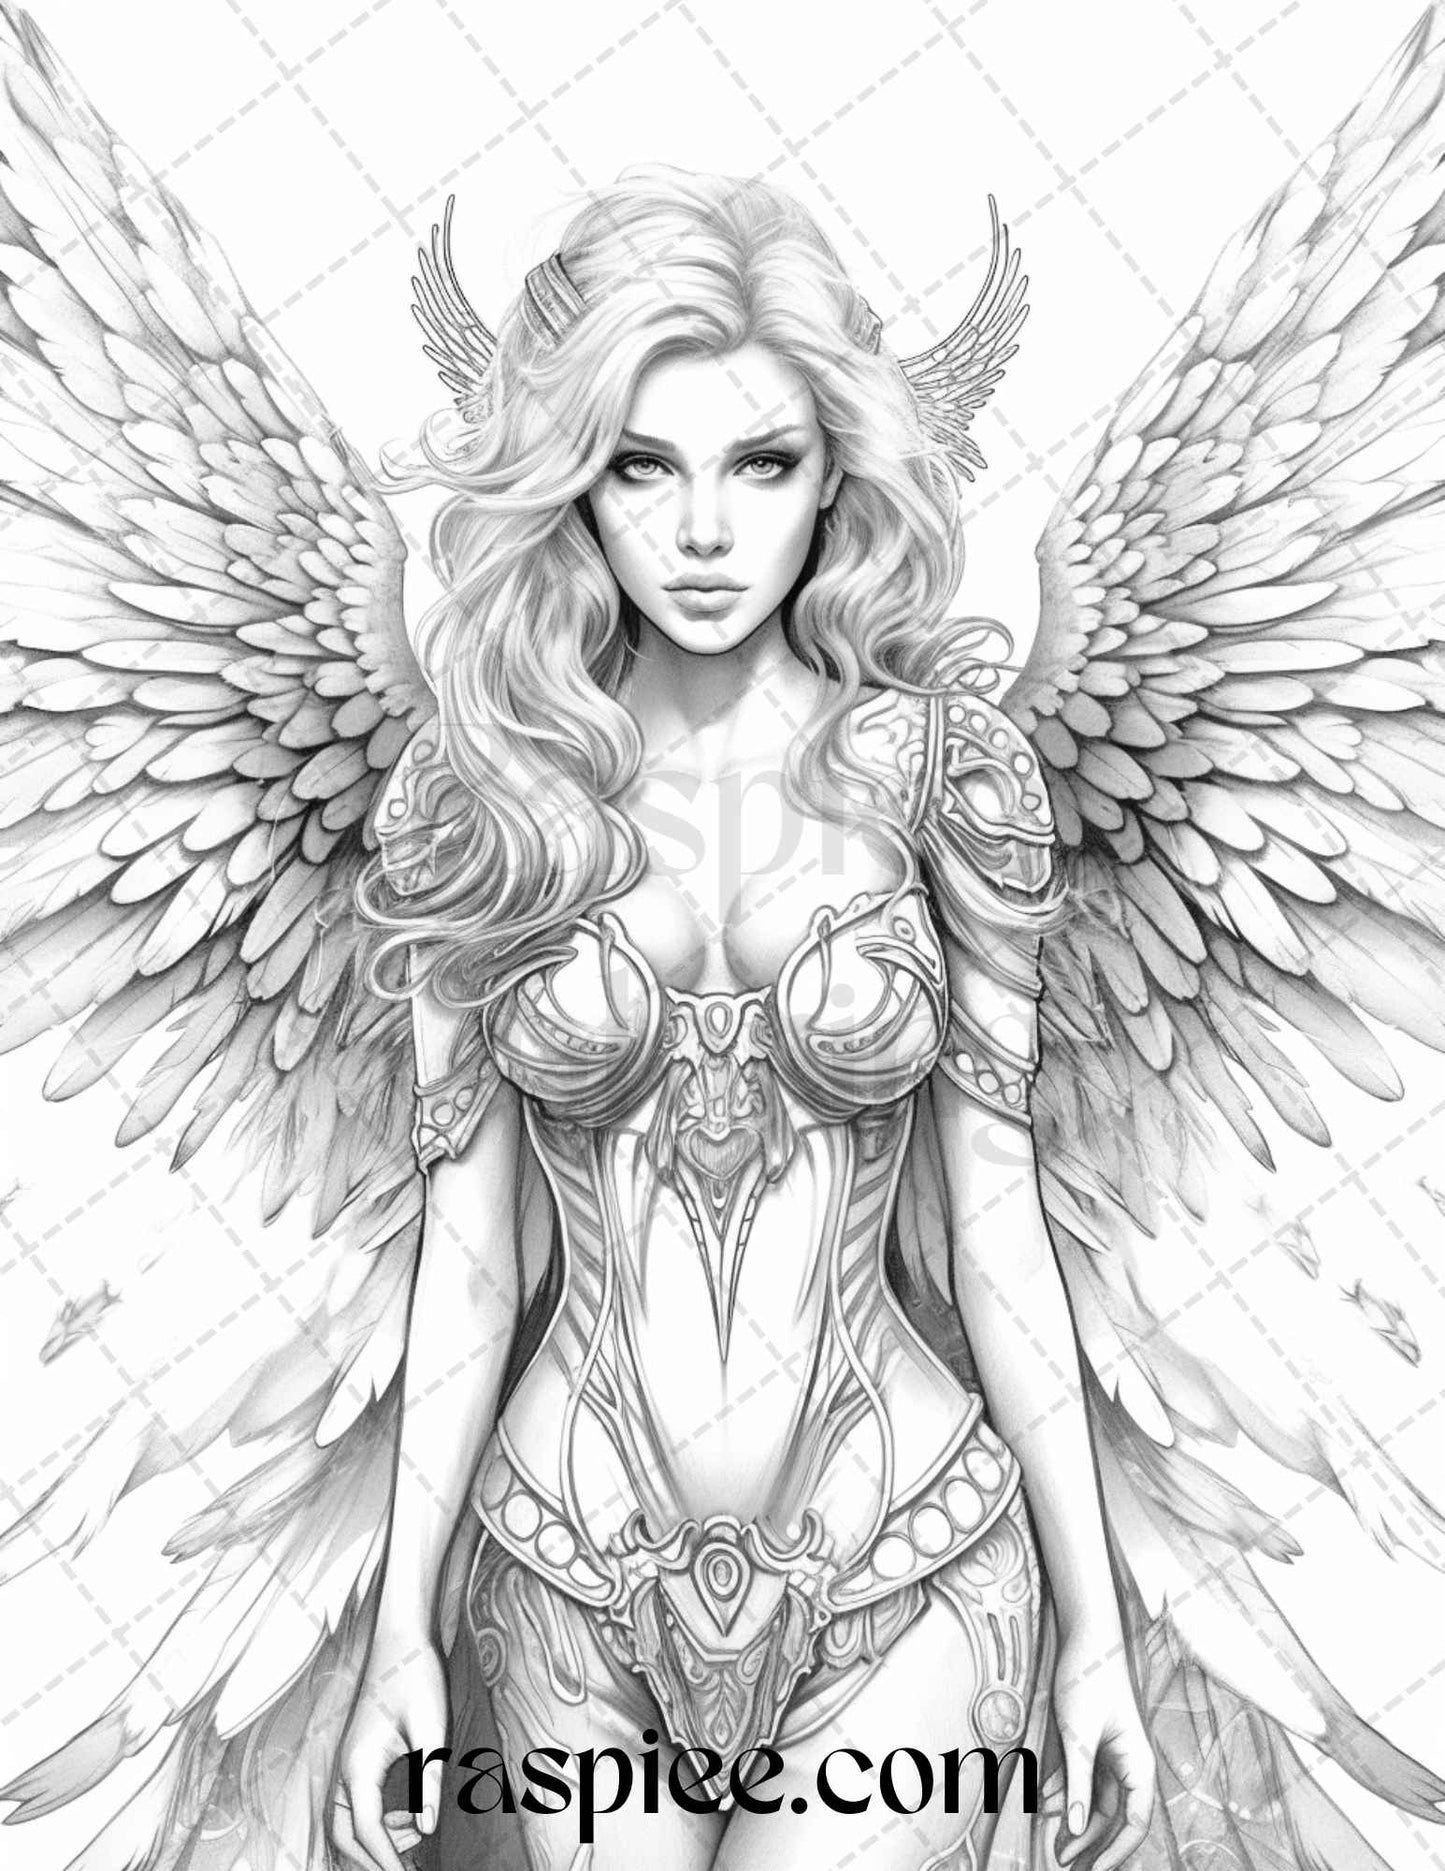 42 Enchanting Angels Grayscale Coloring Pages Printable for Adults, PDF File Instant Download - raspiee